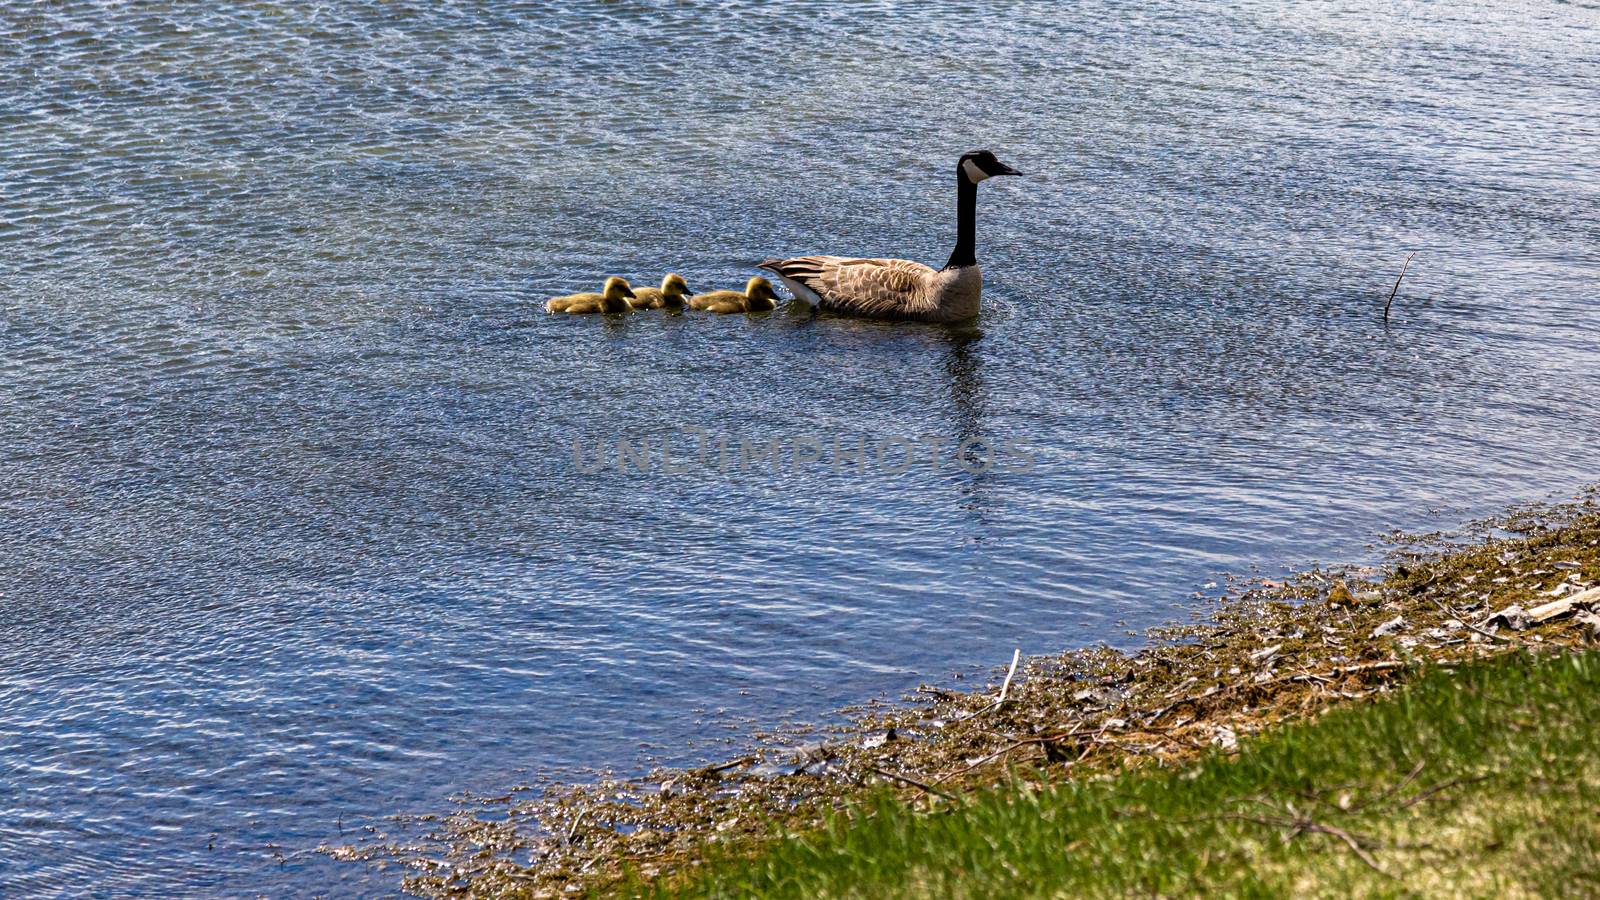 A mother Canada Goose leads her goslings swimming in the water.